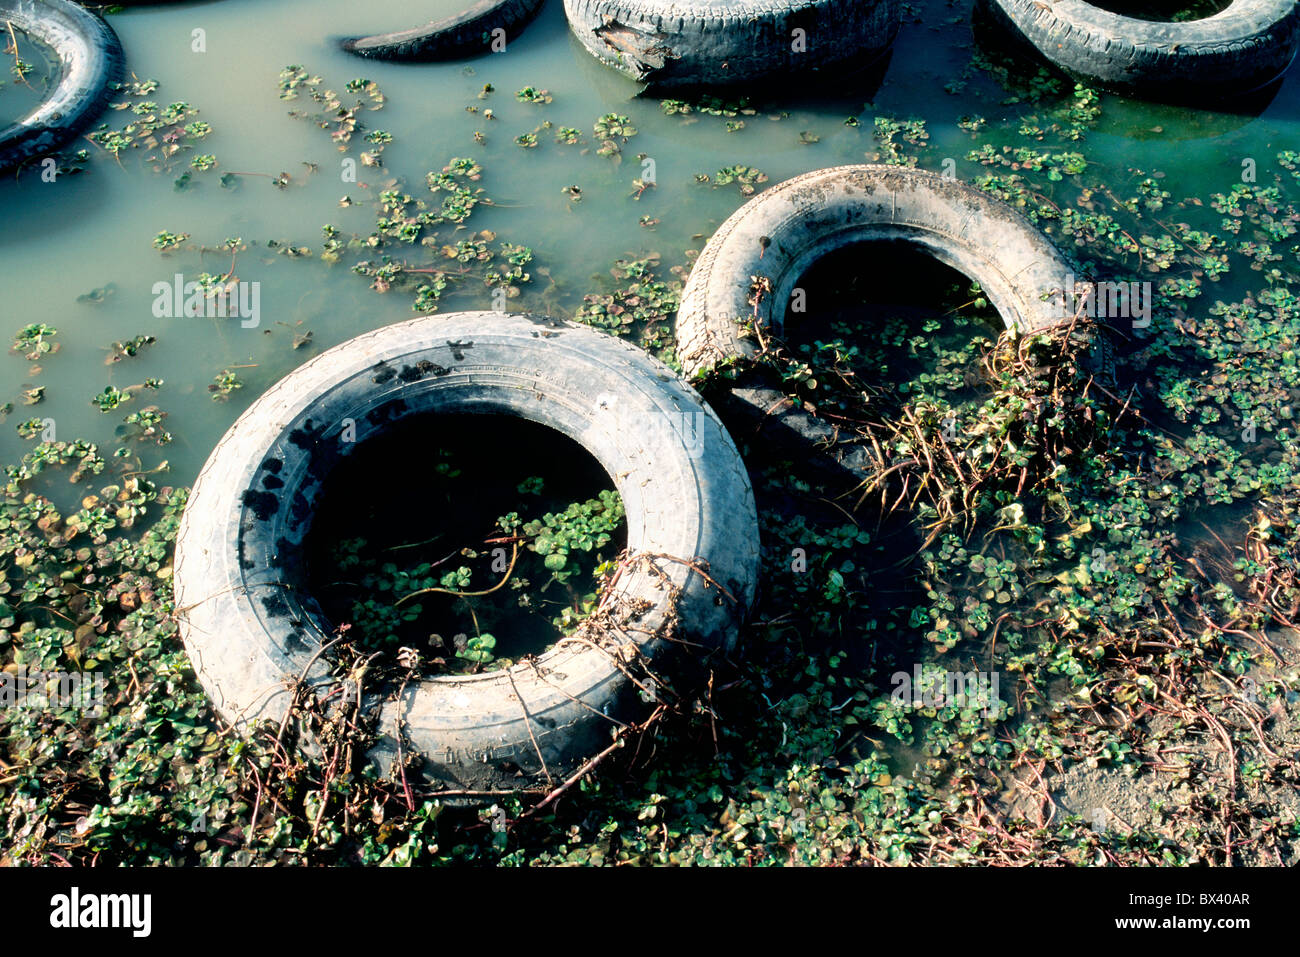 Old tires discarded into pond, Stock Photo